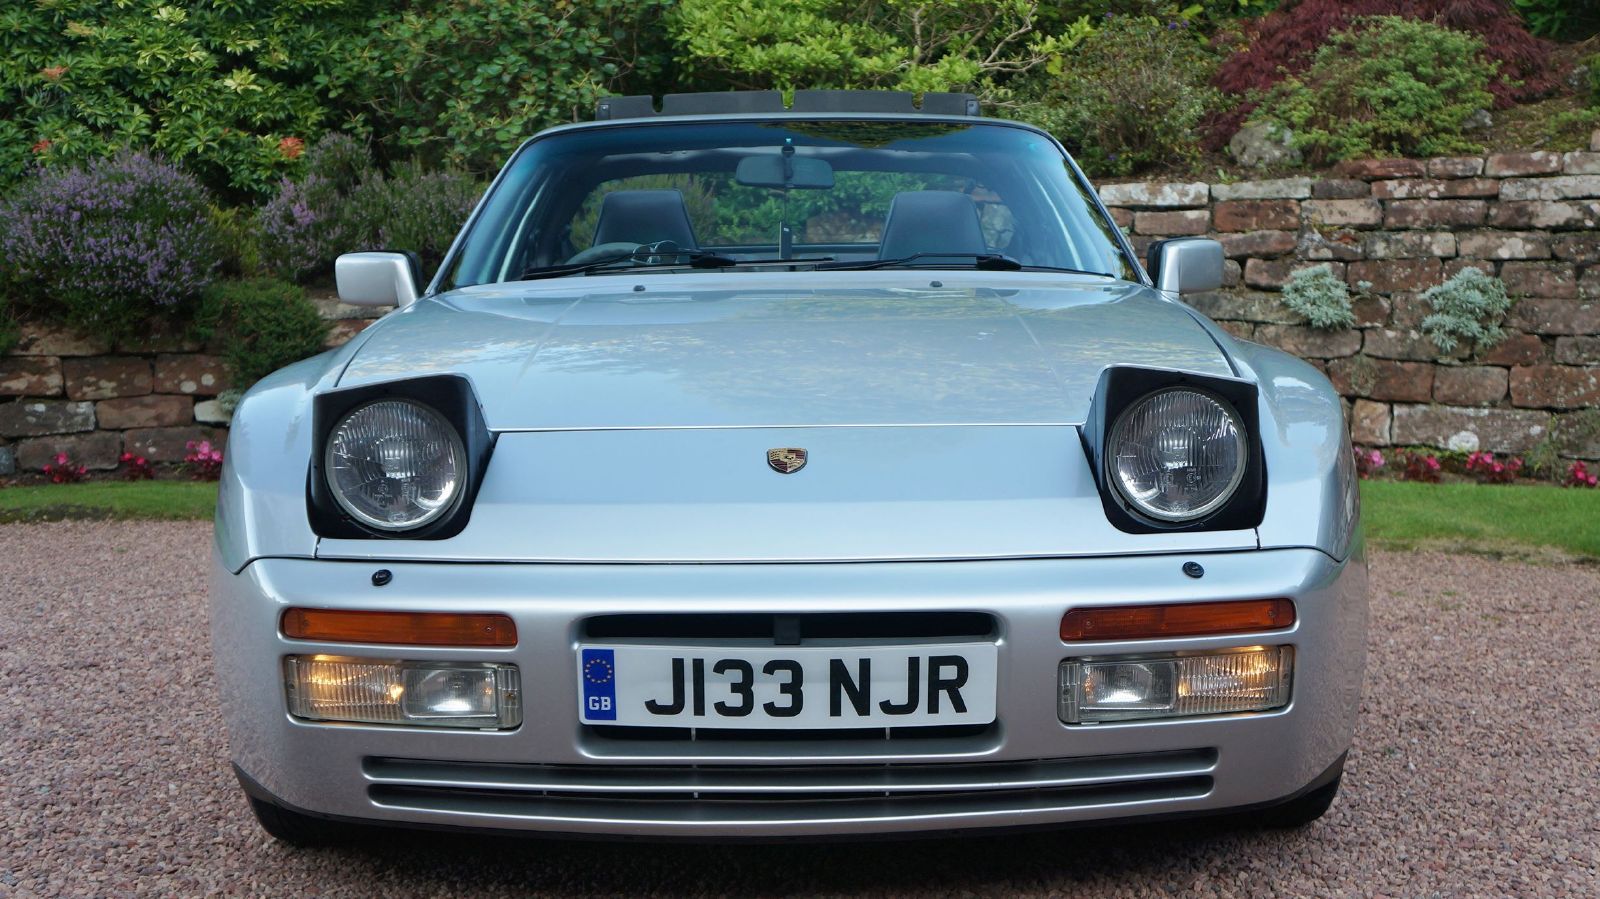 PORSCHE 944 HEADLIGHT SET COMPLETE AS SHOWN fully fuctional sets various colors